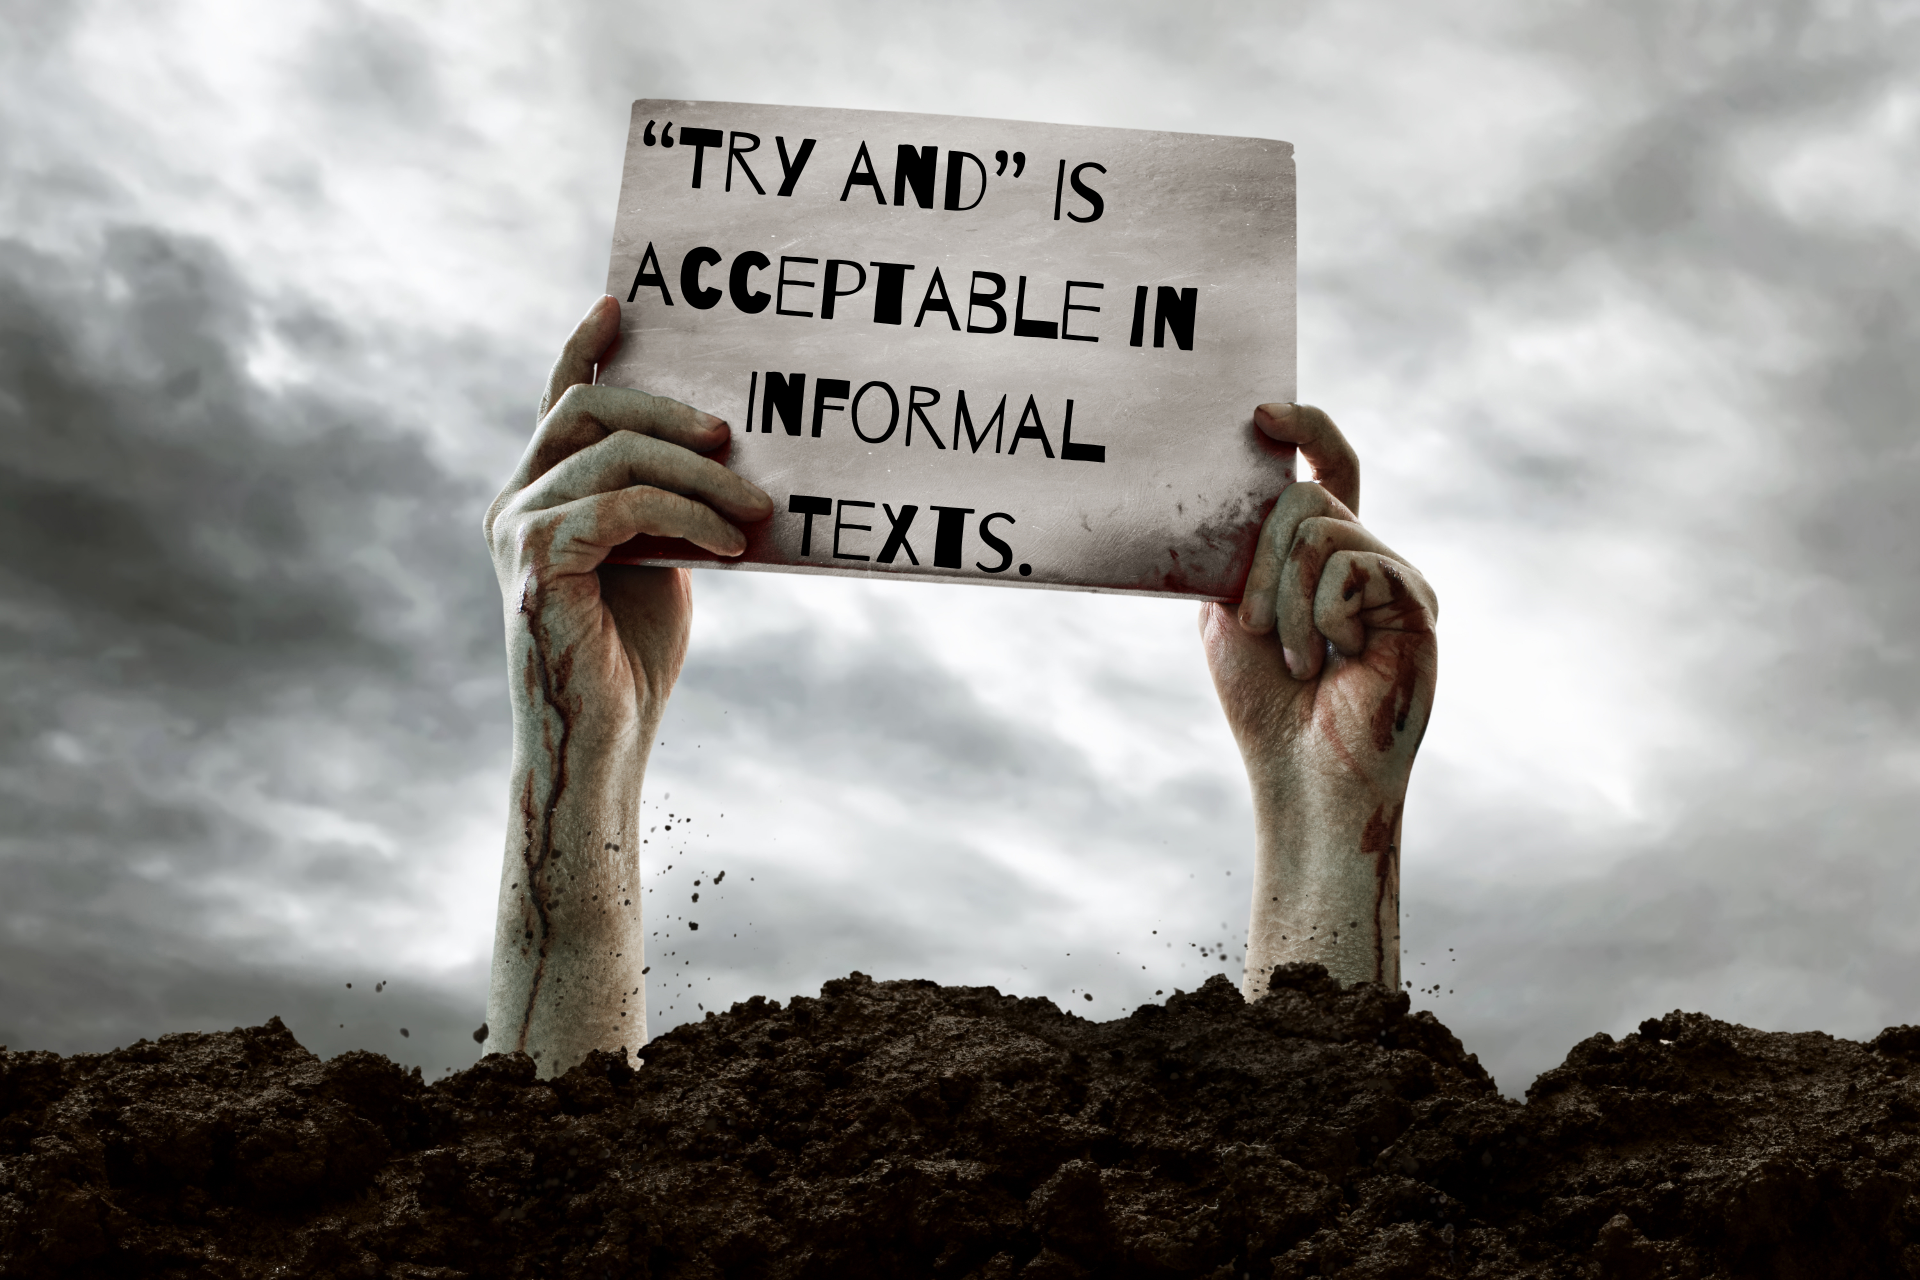 Zombie hands coming out of the dirt and holding a sign that says "'Try and' is acceptable in informal texts."